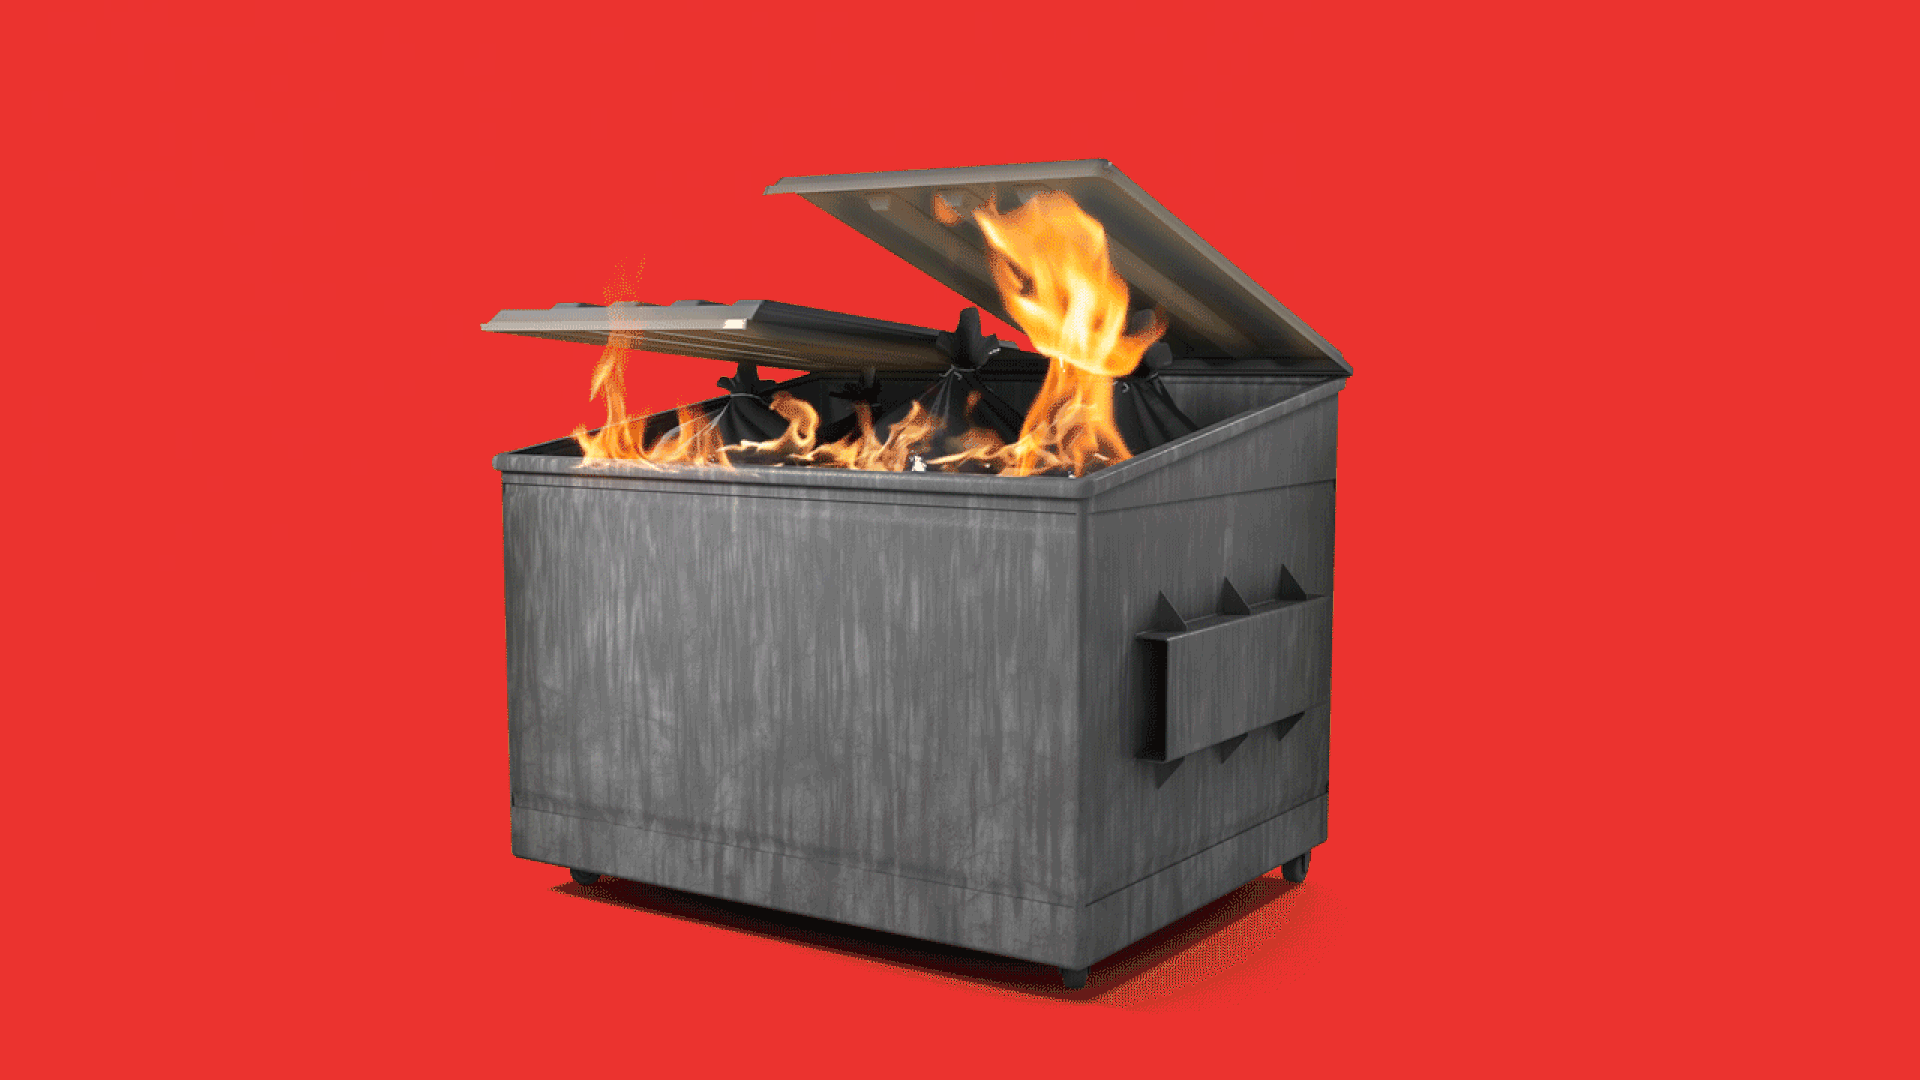 Animated illustration of a dumpster on fire.